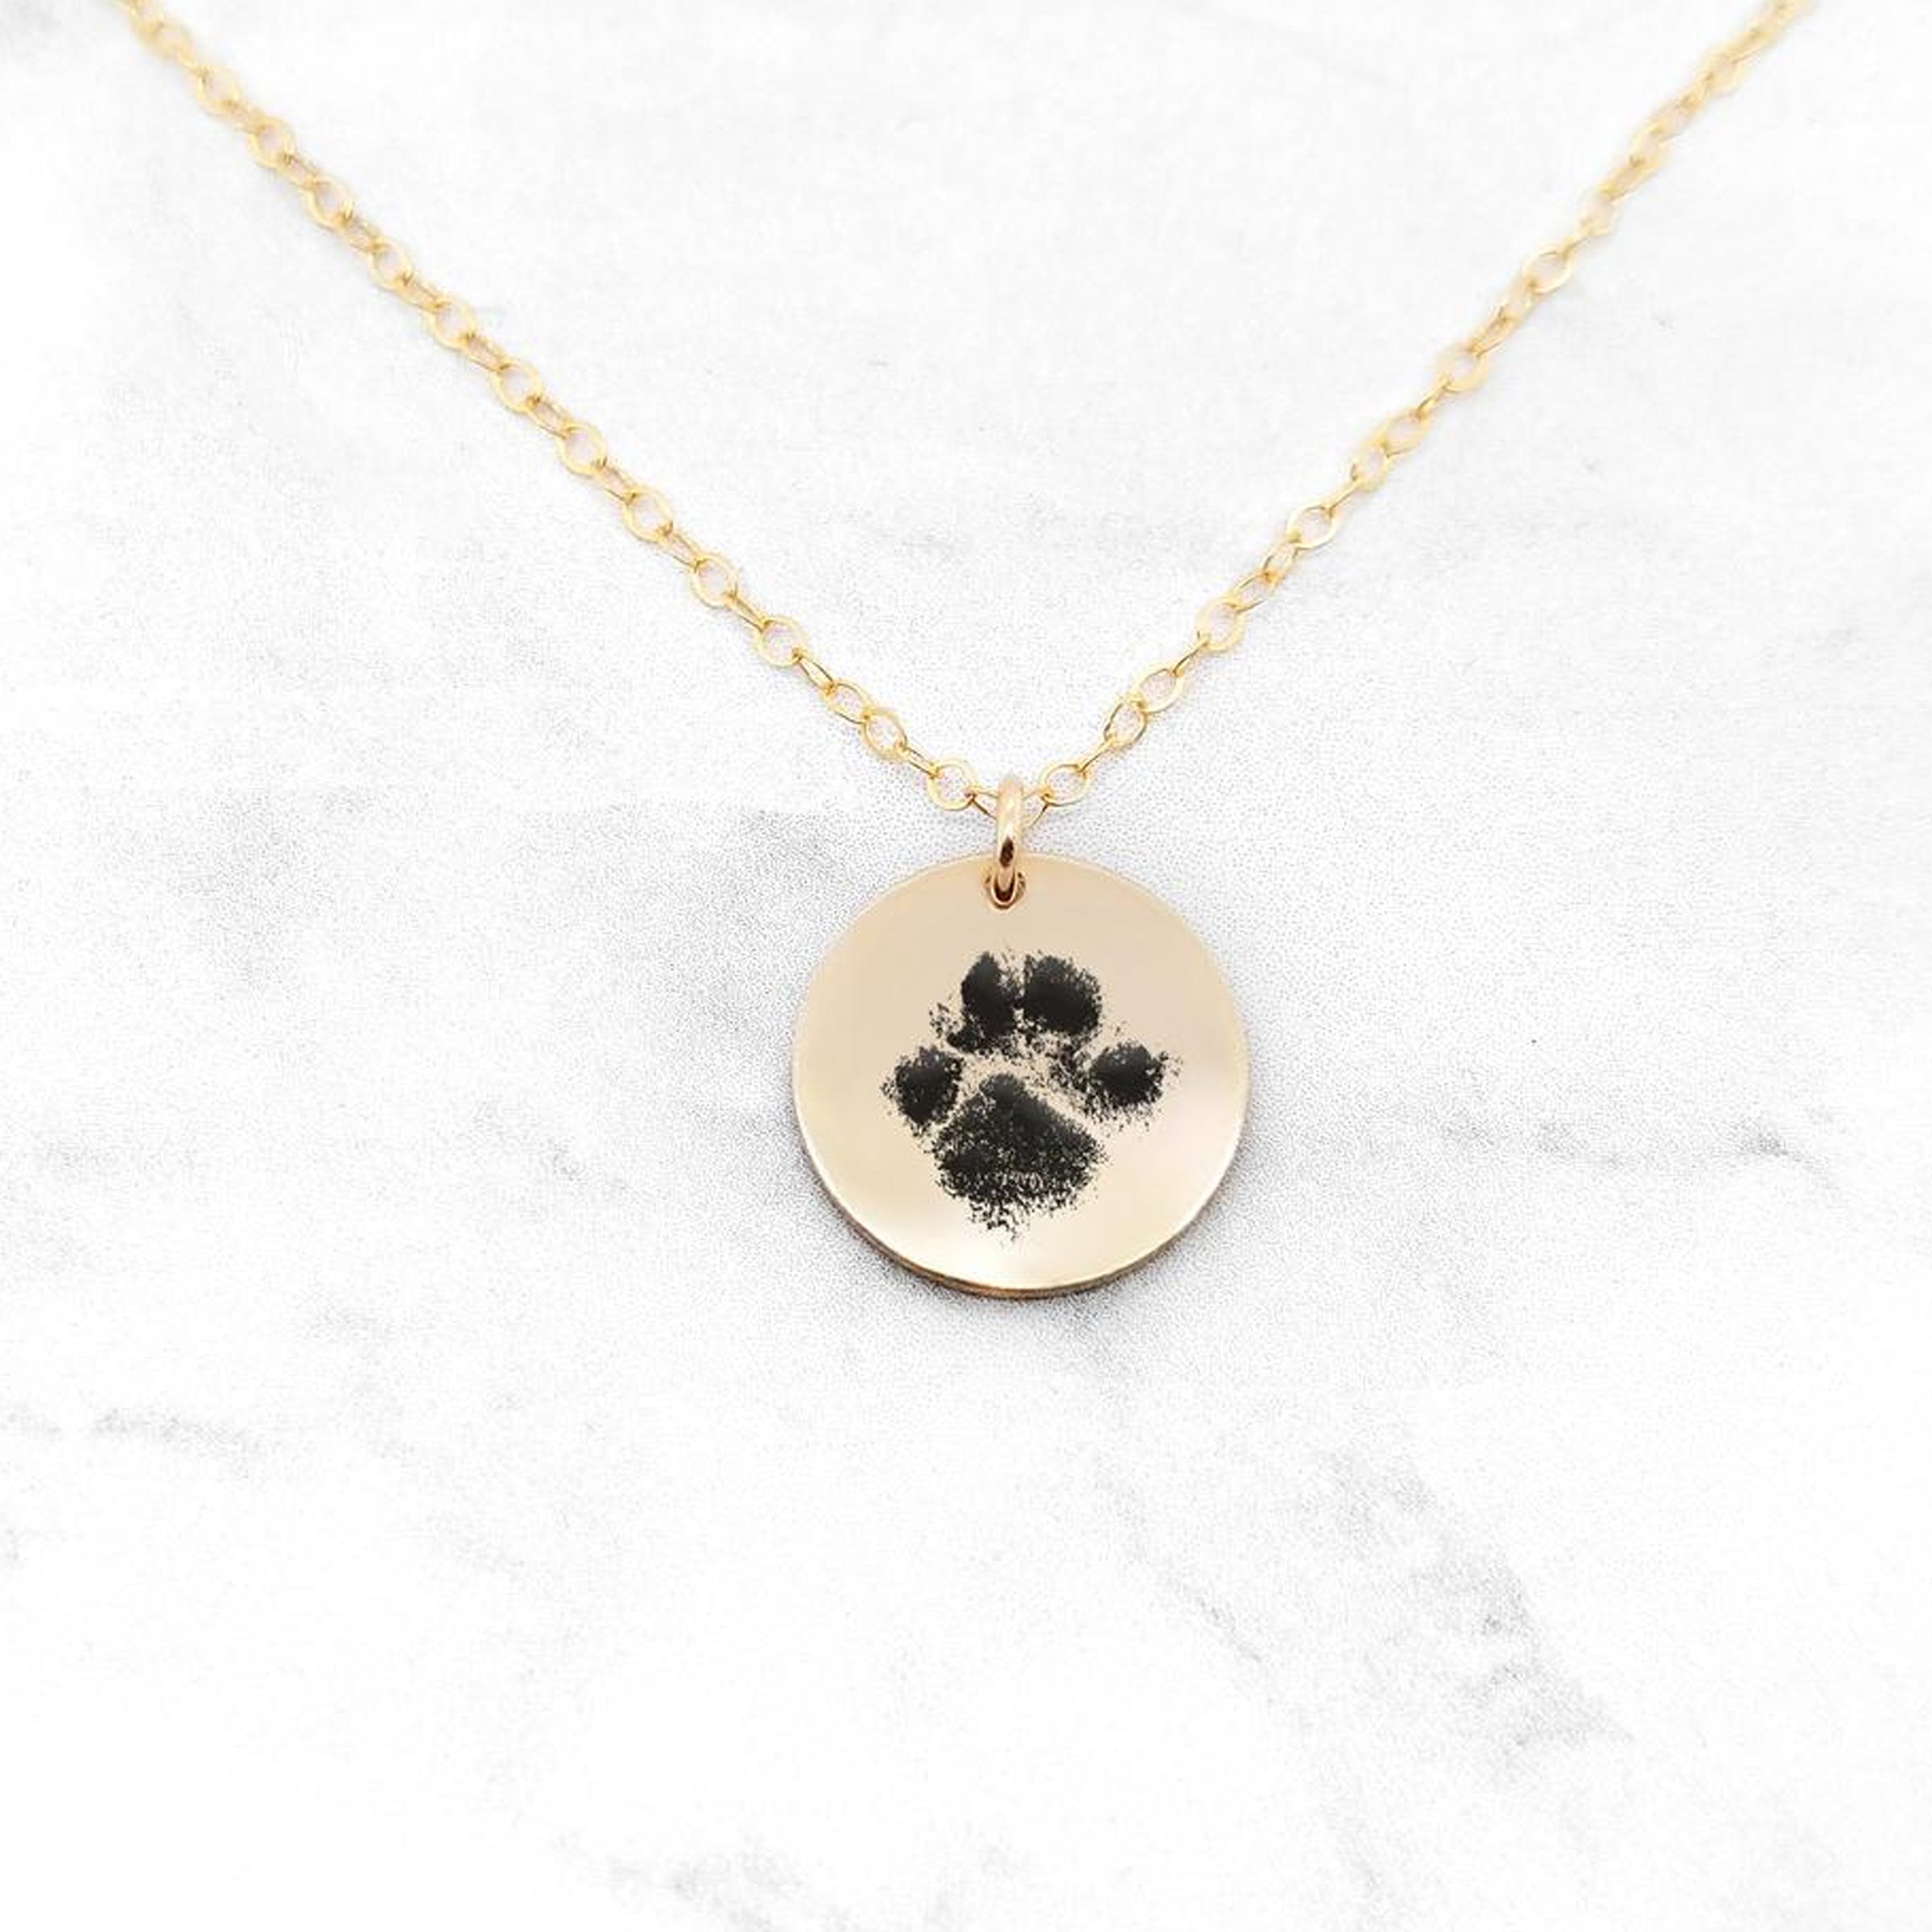 Buy Actual Paw Print Necklace Online In India - Etsy India